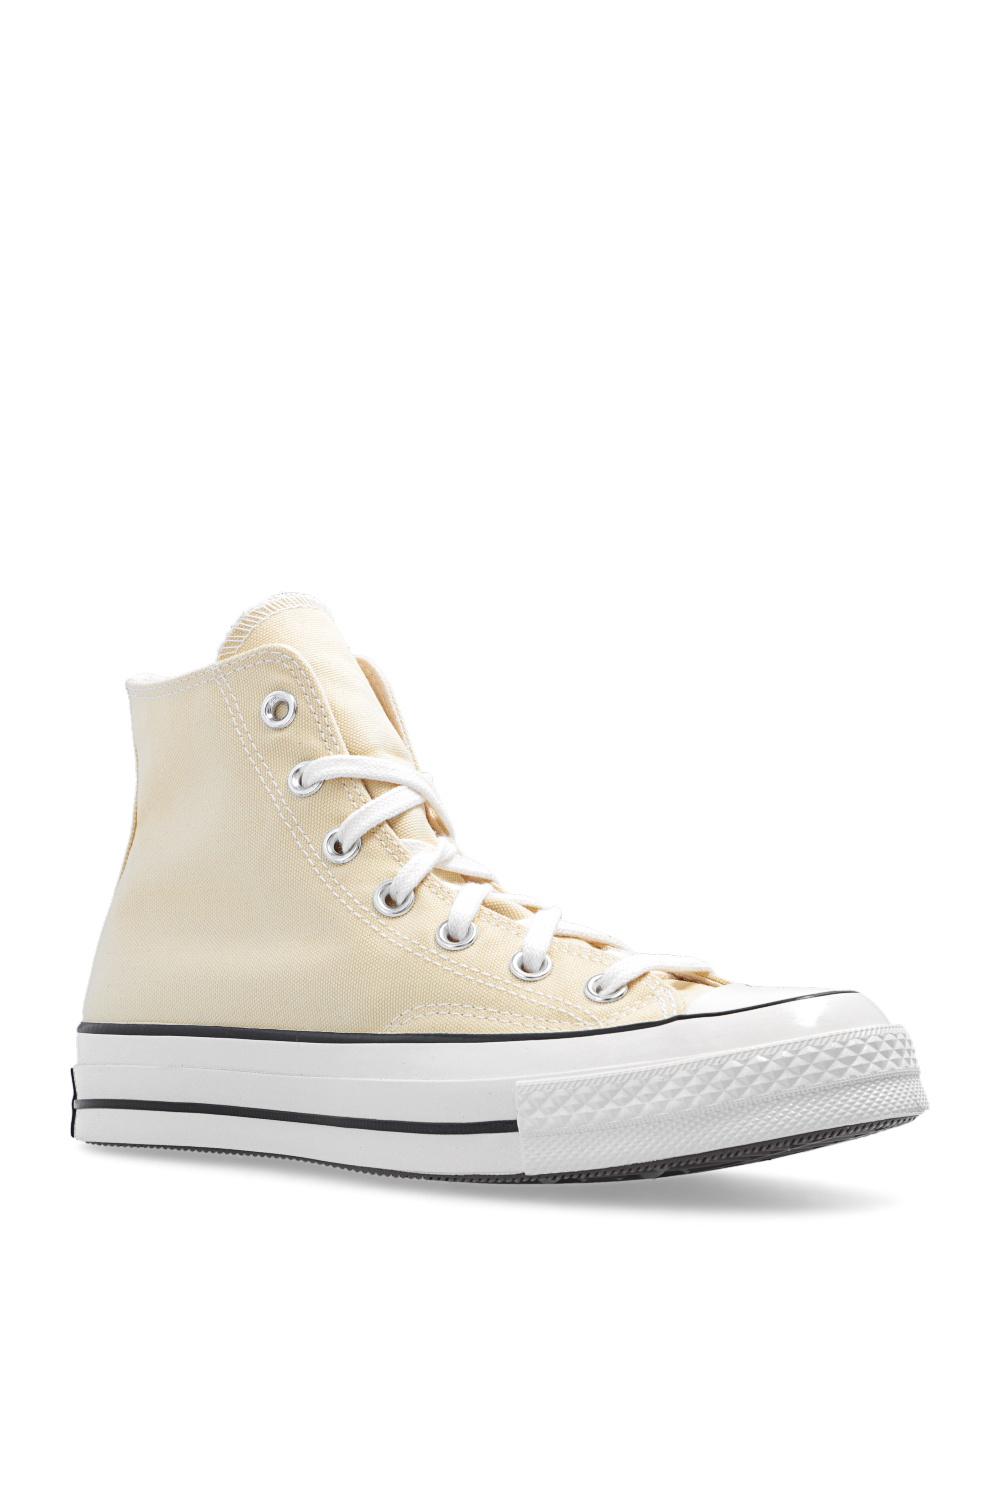 Converse 'chuck 70 Hi' High-top Sneakers in Beige (Yellow) - Save 63% | Lyst